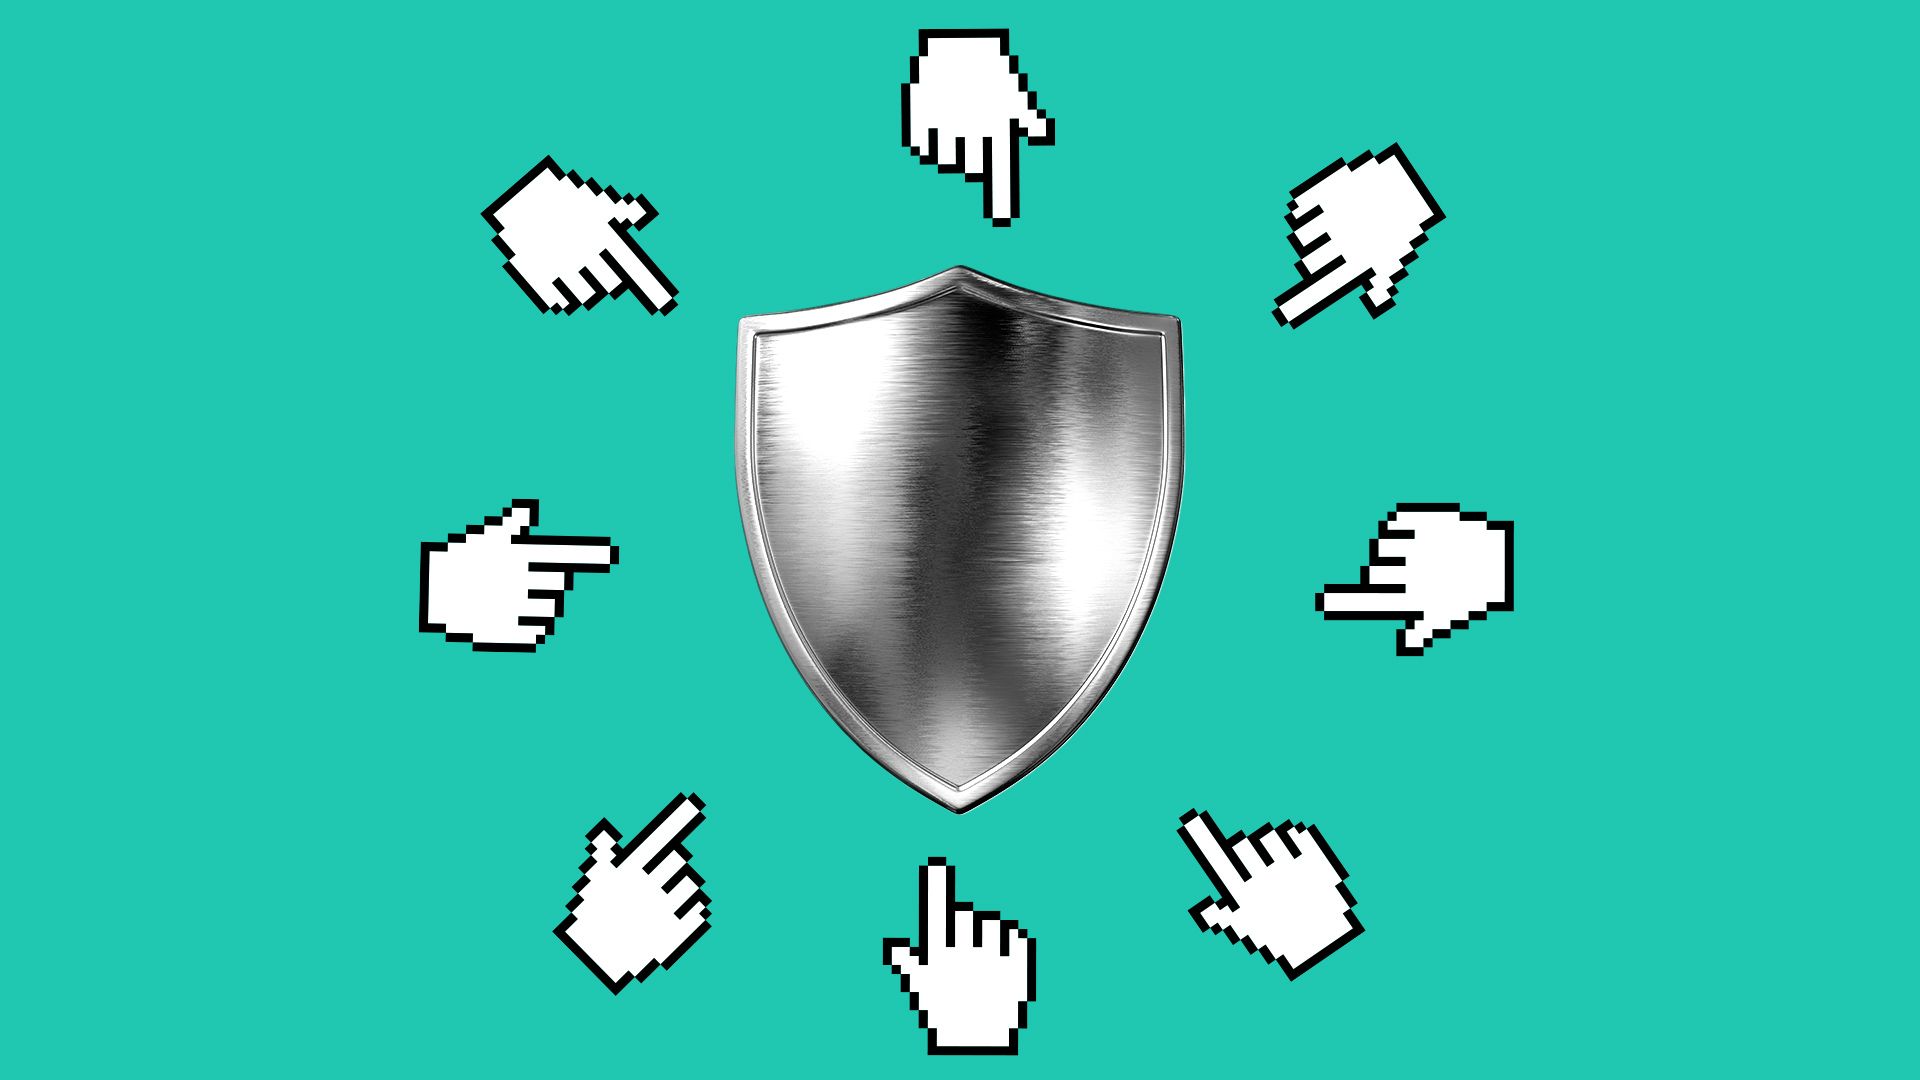 Illustration of a shield surrounded by pointing hand cursors.